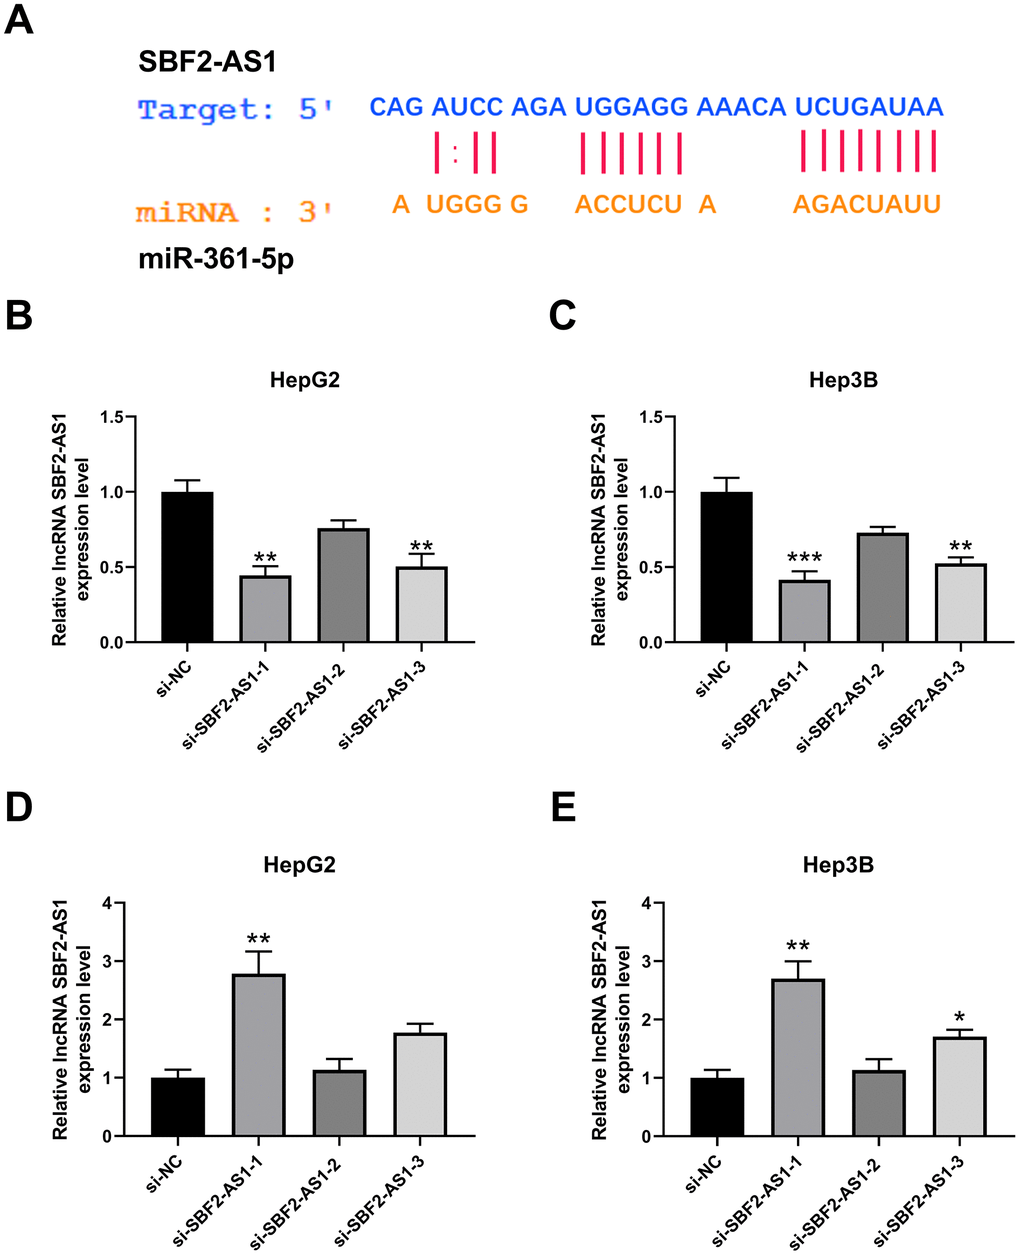 Effect of lncRNA SBF2-AS1 on miR-361-5p. (A) Prediction of a connection site of lncRNA SBF2-AS1 and miR-361-5p. (B) The influence of si-SBF2-AS1 on lncRNA SBF2-AS1 in HepG2 cells. (C) The influence of si-SBF2-AS1 on lncRNA SBF2-AS1 in Hep3B cells. (D) The effect of lncRNA SBF2-AS1 downregulation on miR-361-5p in HepG2 cells. (E) The influence of lncRNA SBF2-AS1 downregulation on miR-361-5p in Hep3B cells. The obtained data are expressed as mean ± SEM. * P 